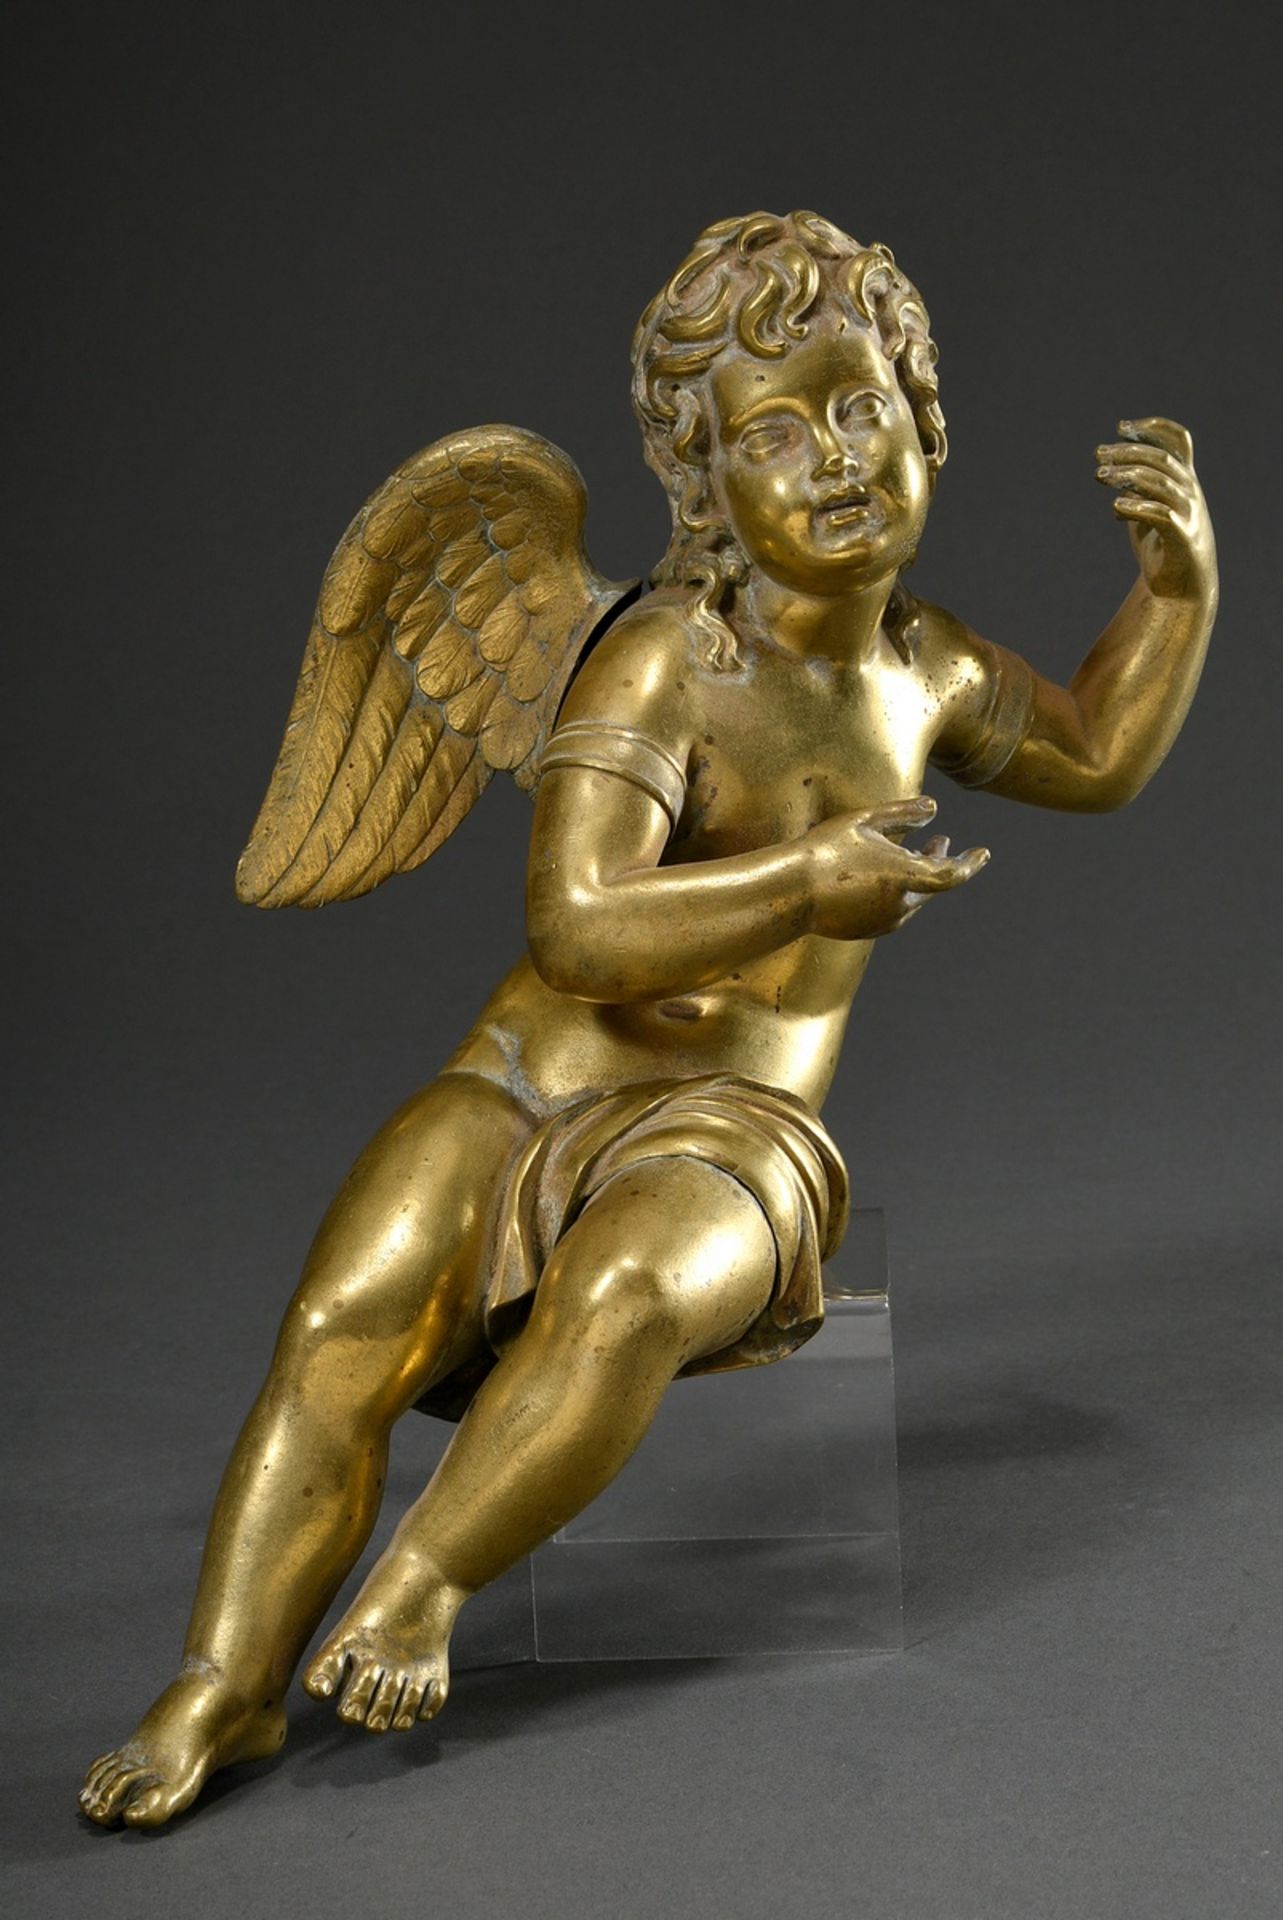 Fire-gilt bronze "Angel", probably France early 19th century, h. 31cm, attribute lost, slight signs